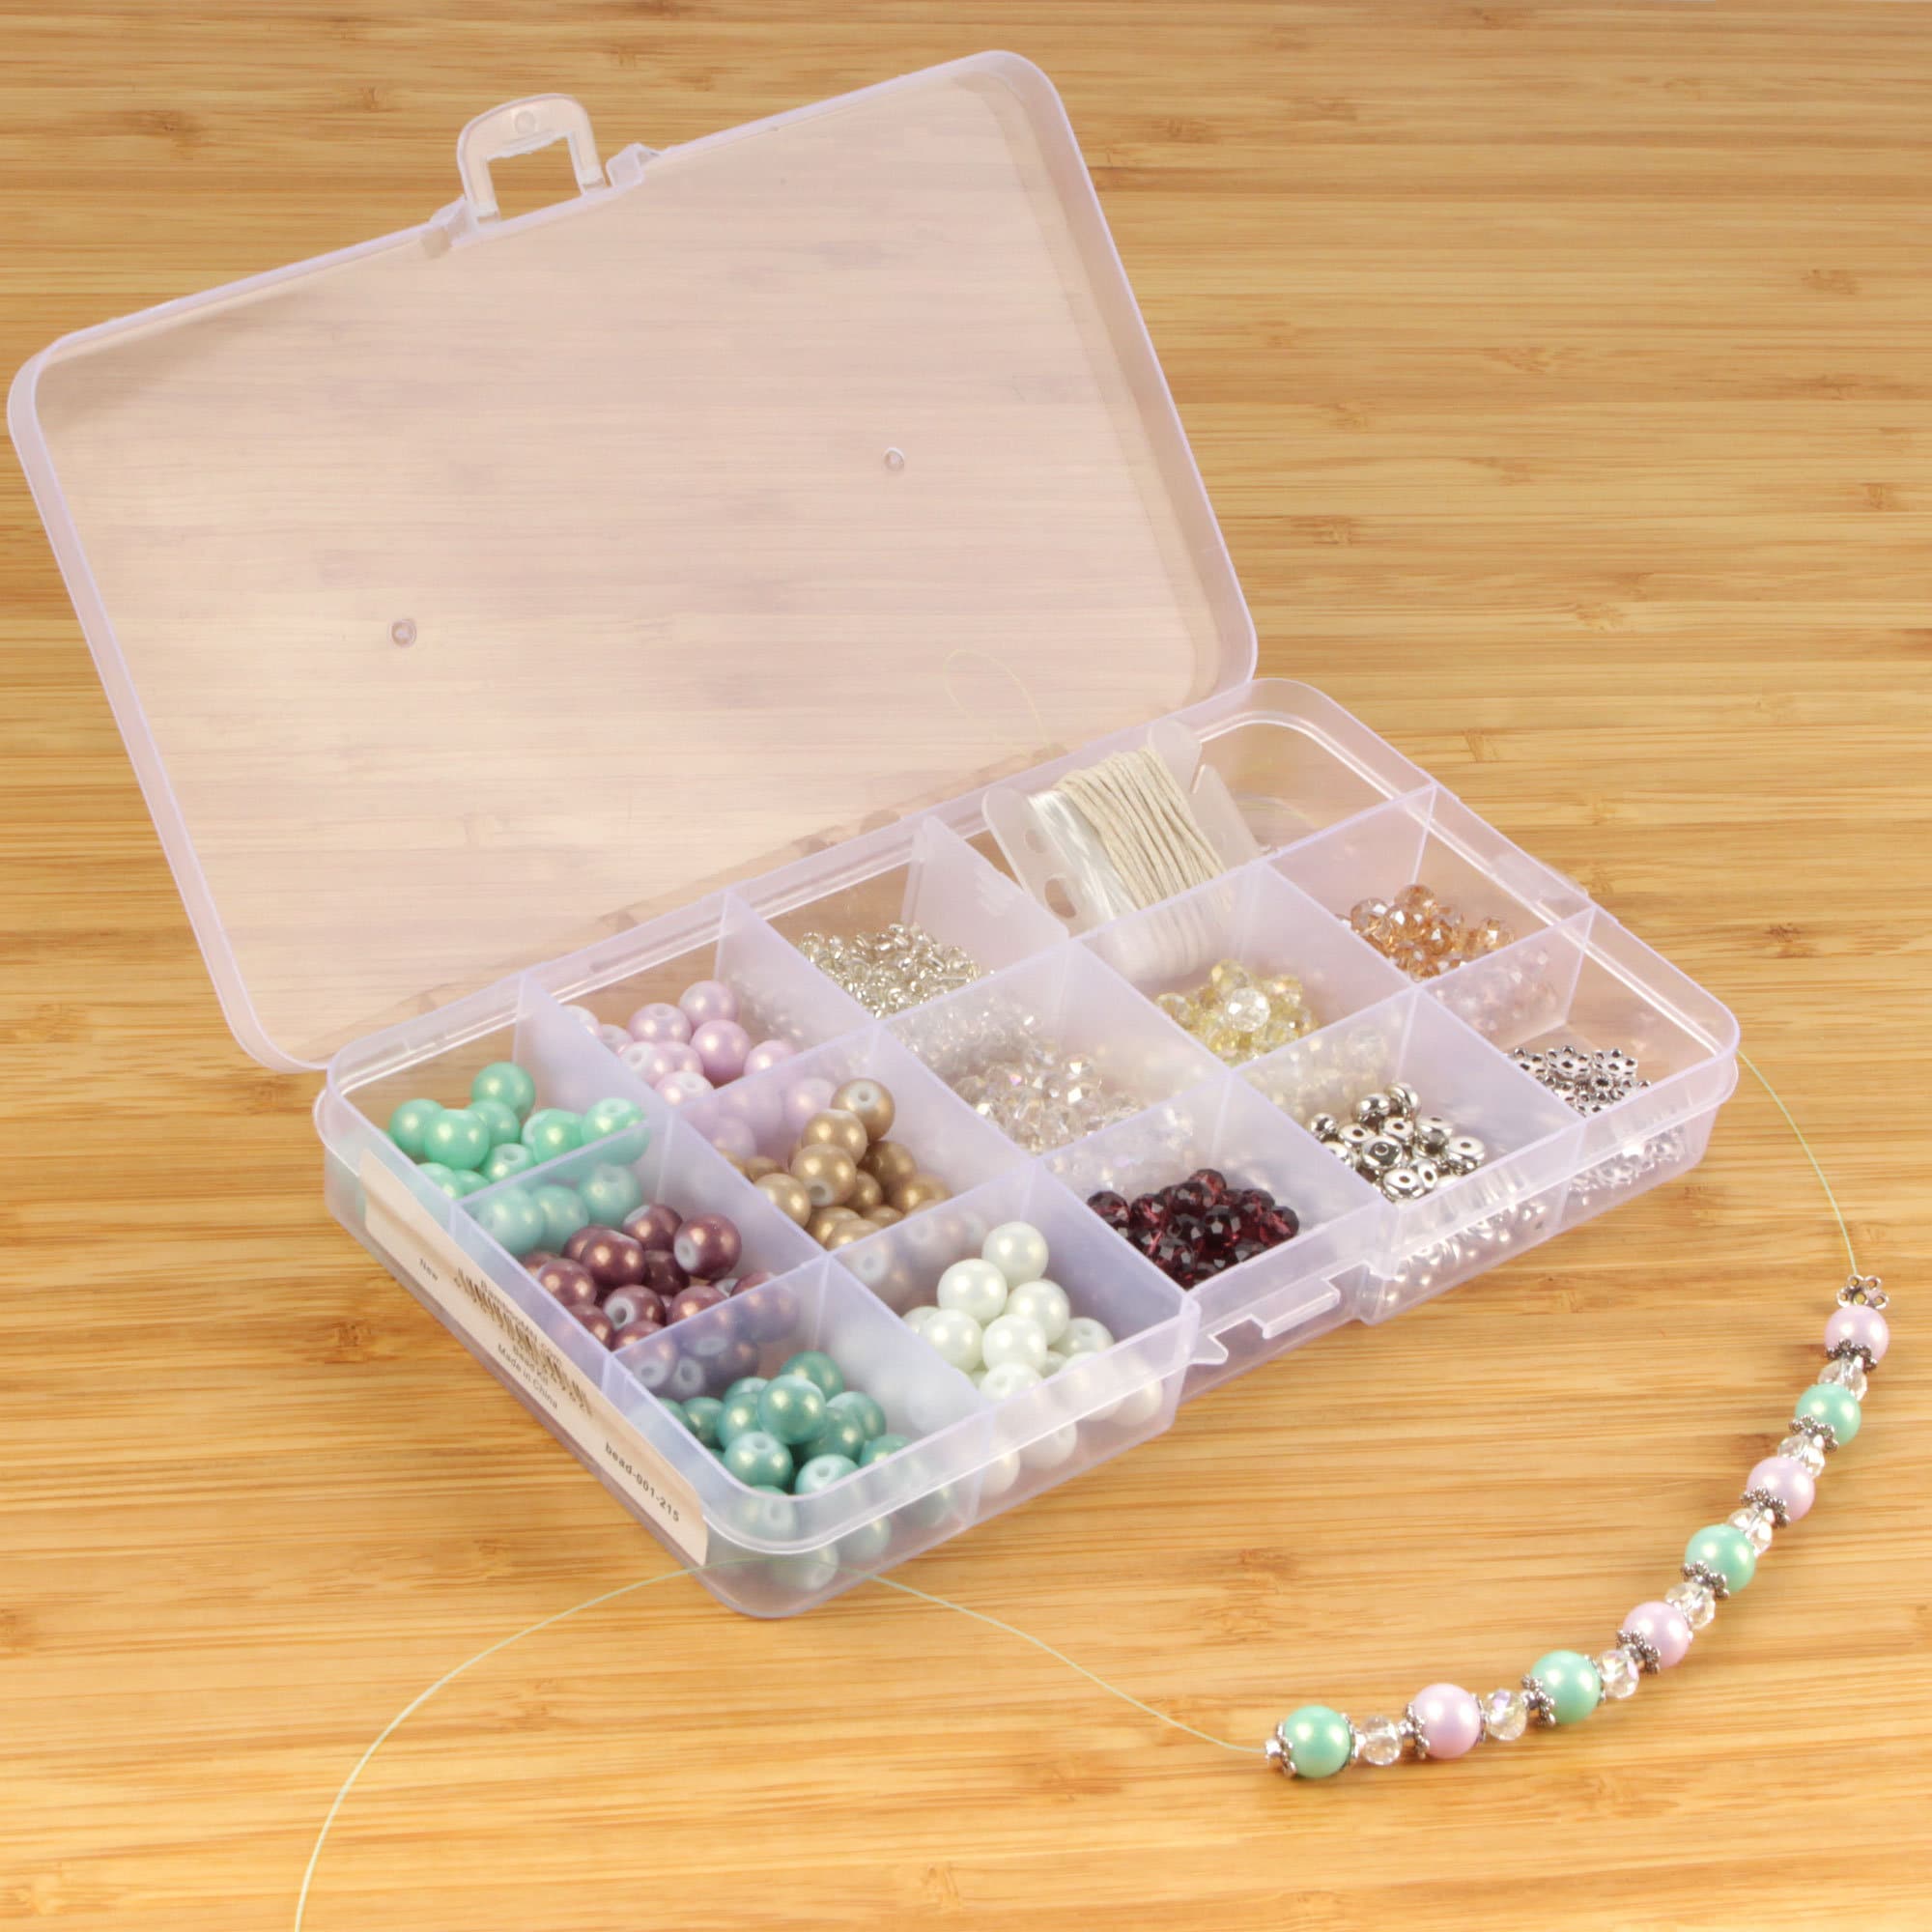 10 Pounds of Assorted Jewelry Beads & Findings for Jewelry making &  crafting.